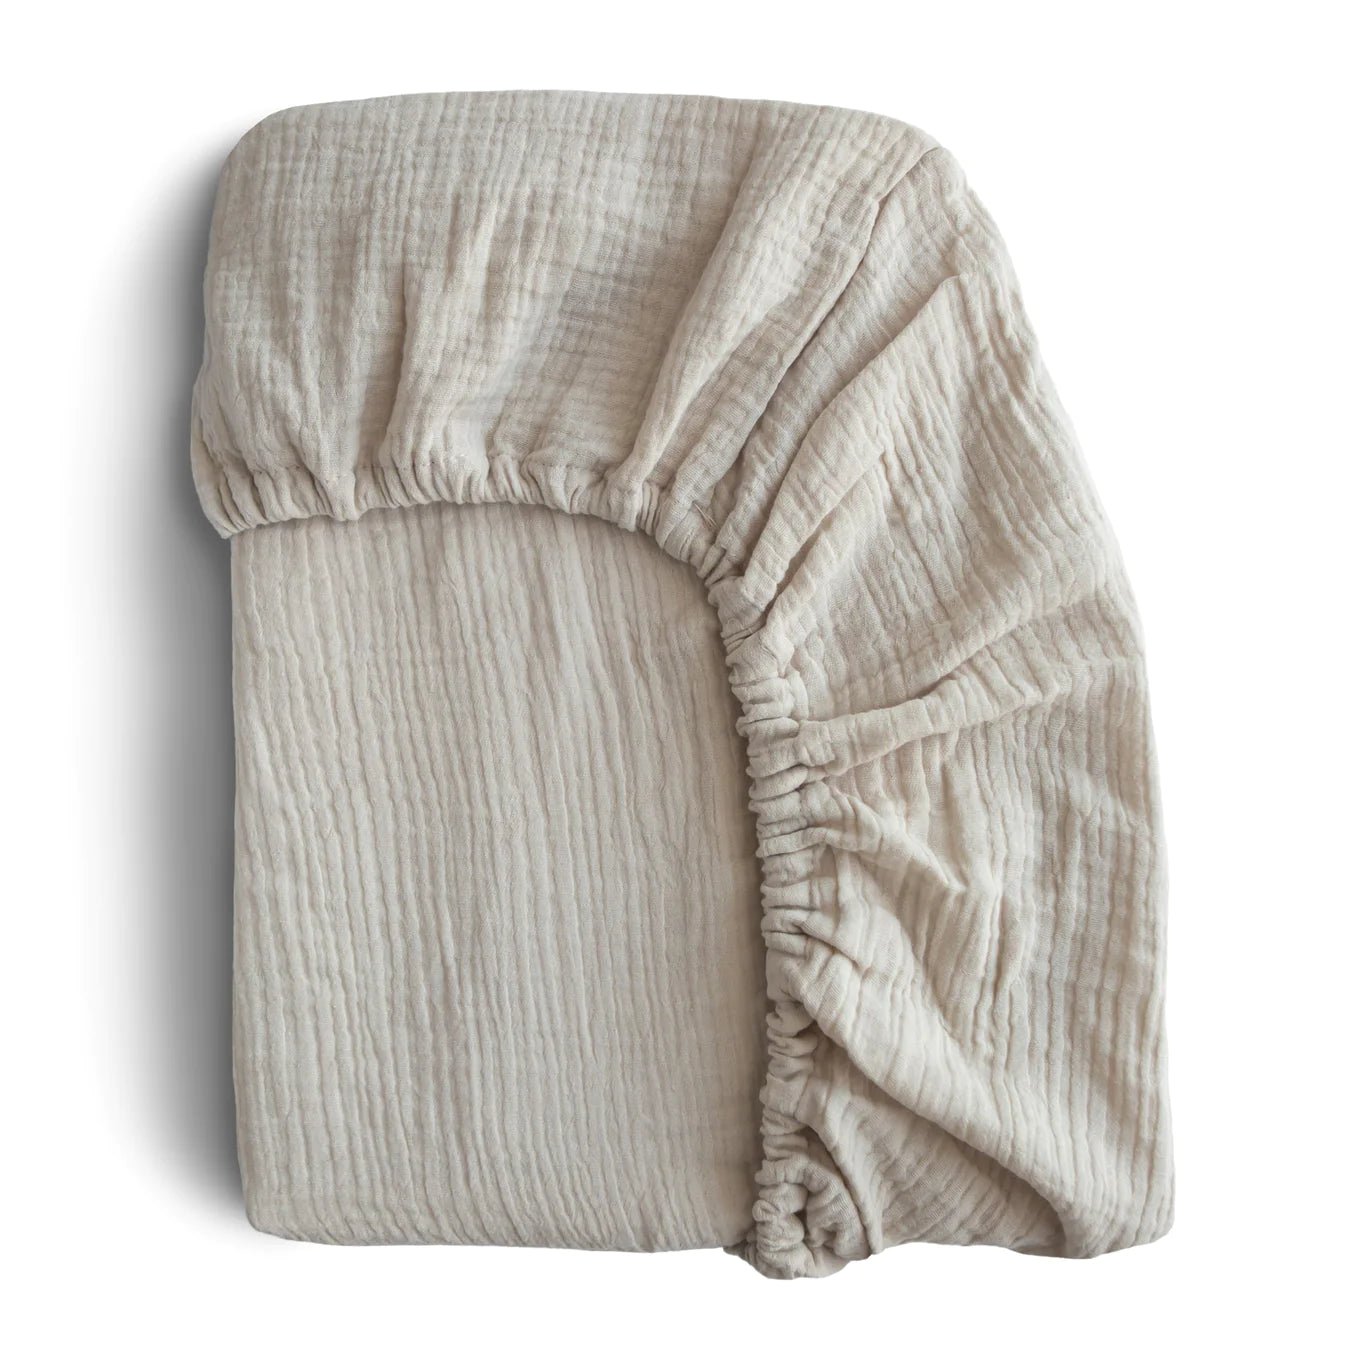 Mushie Extra Soft Muslin Crib Fitted Sheet - ANB Baby -810052460246$20 - $50